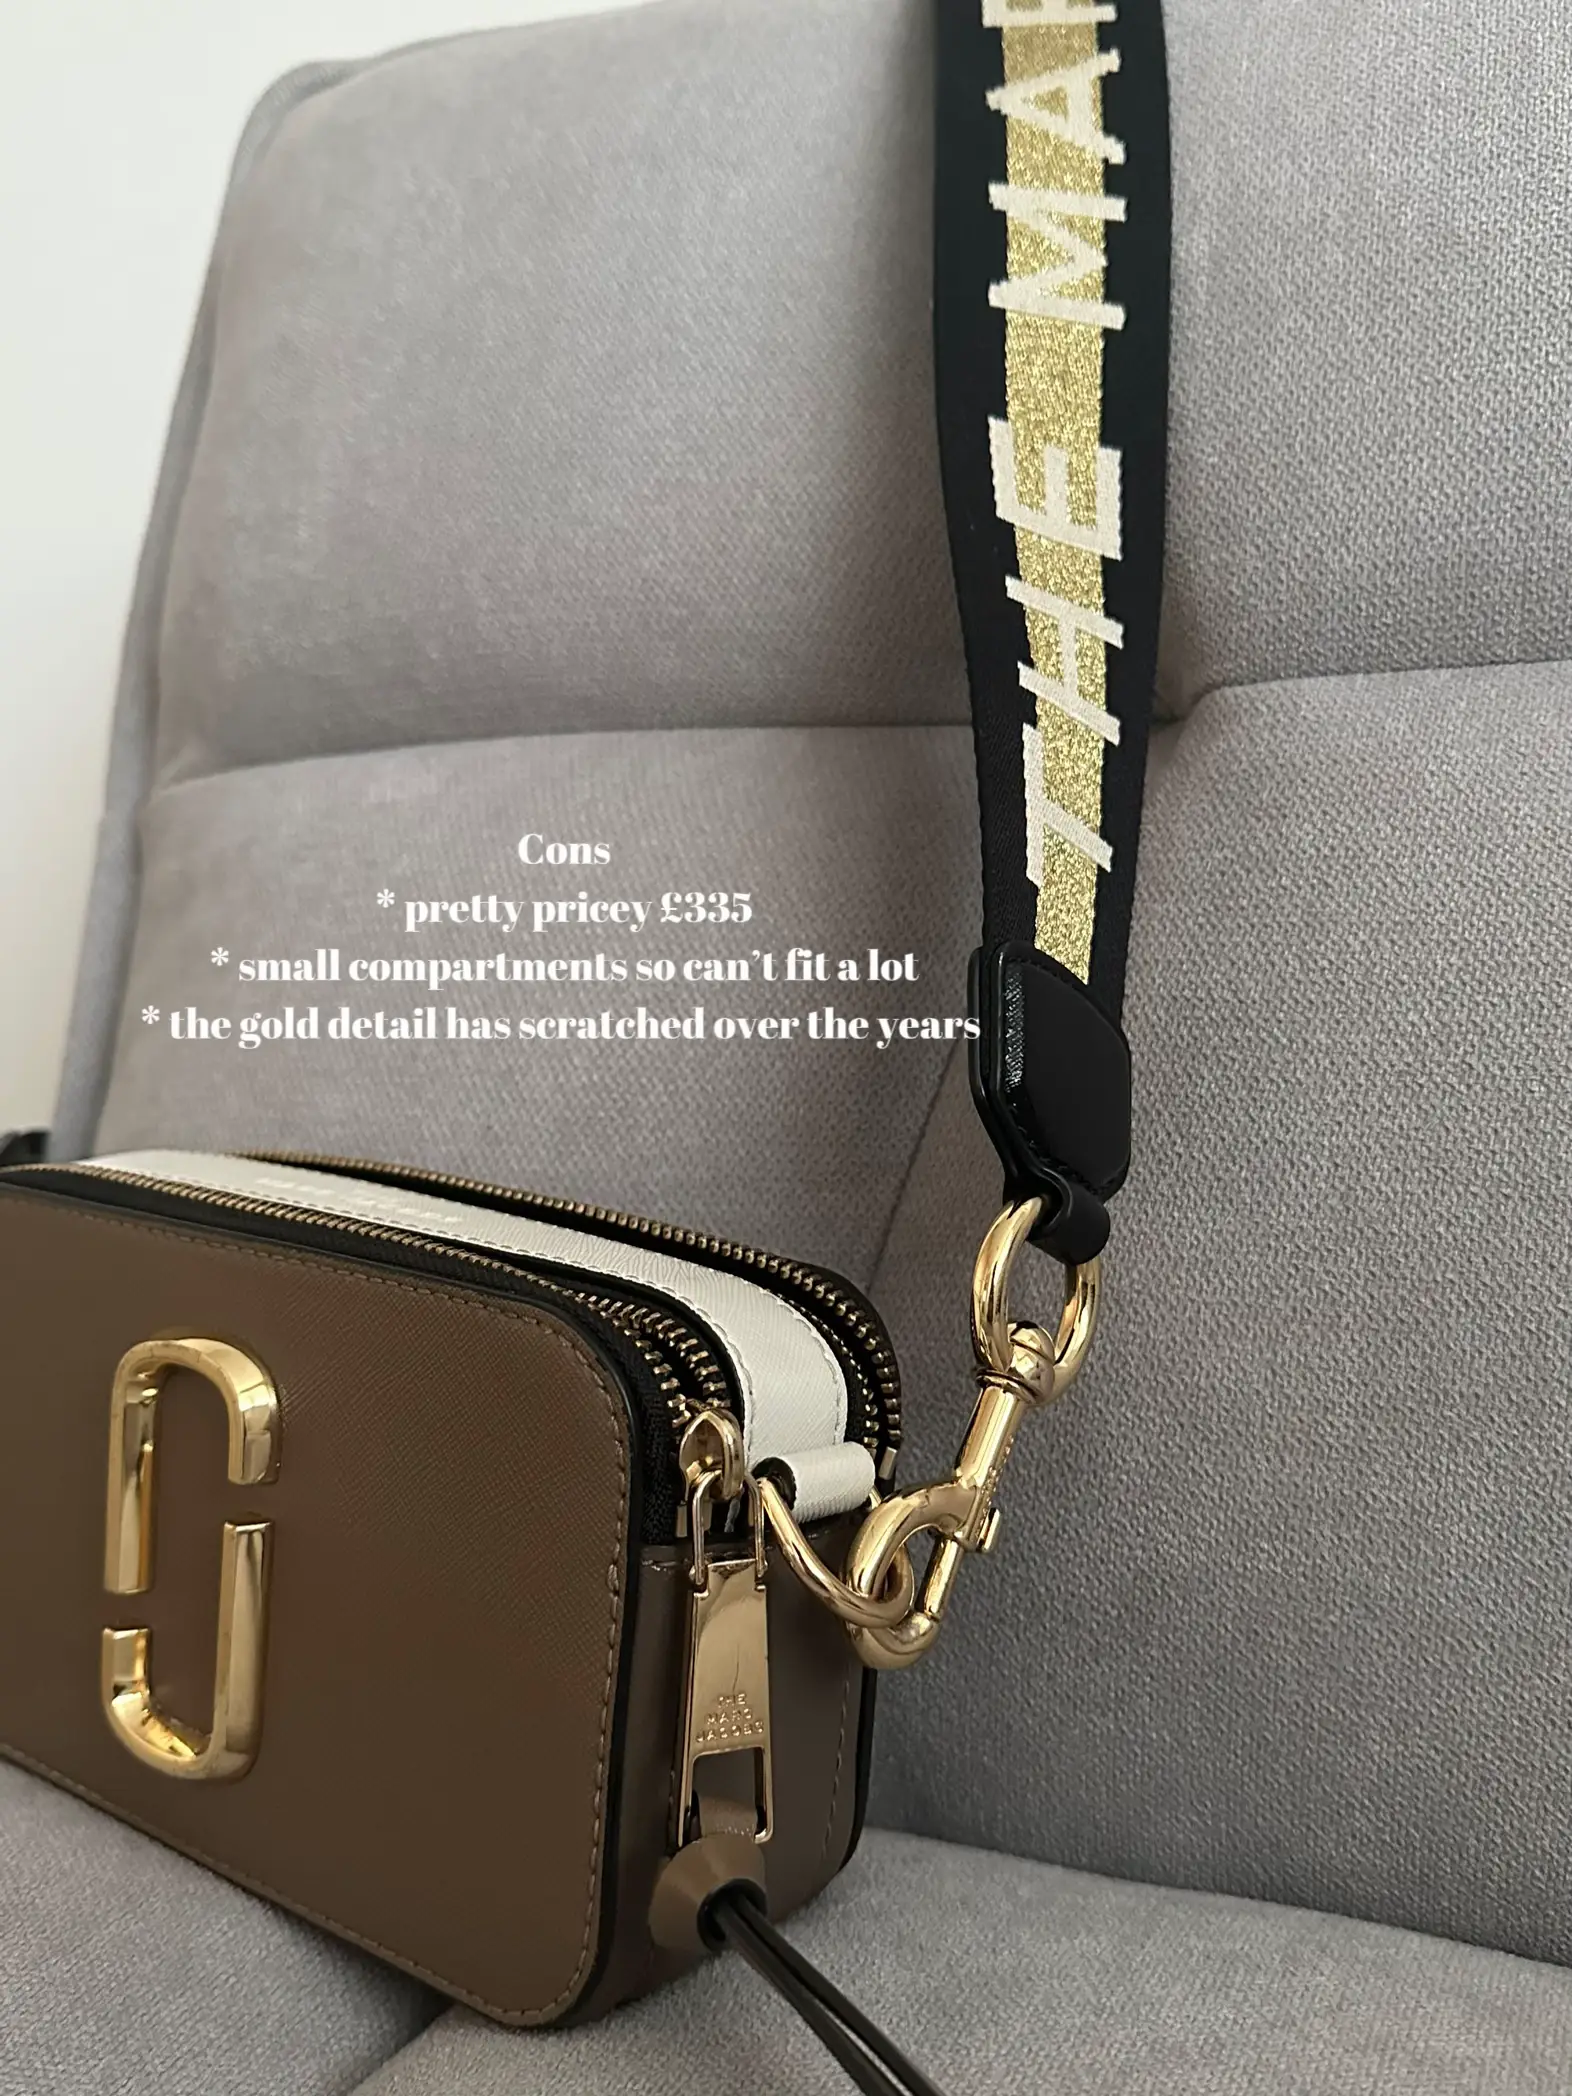 review] Marc Jacobs Snapshot Bag In Silver Multi From Dhgate